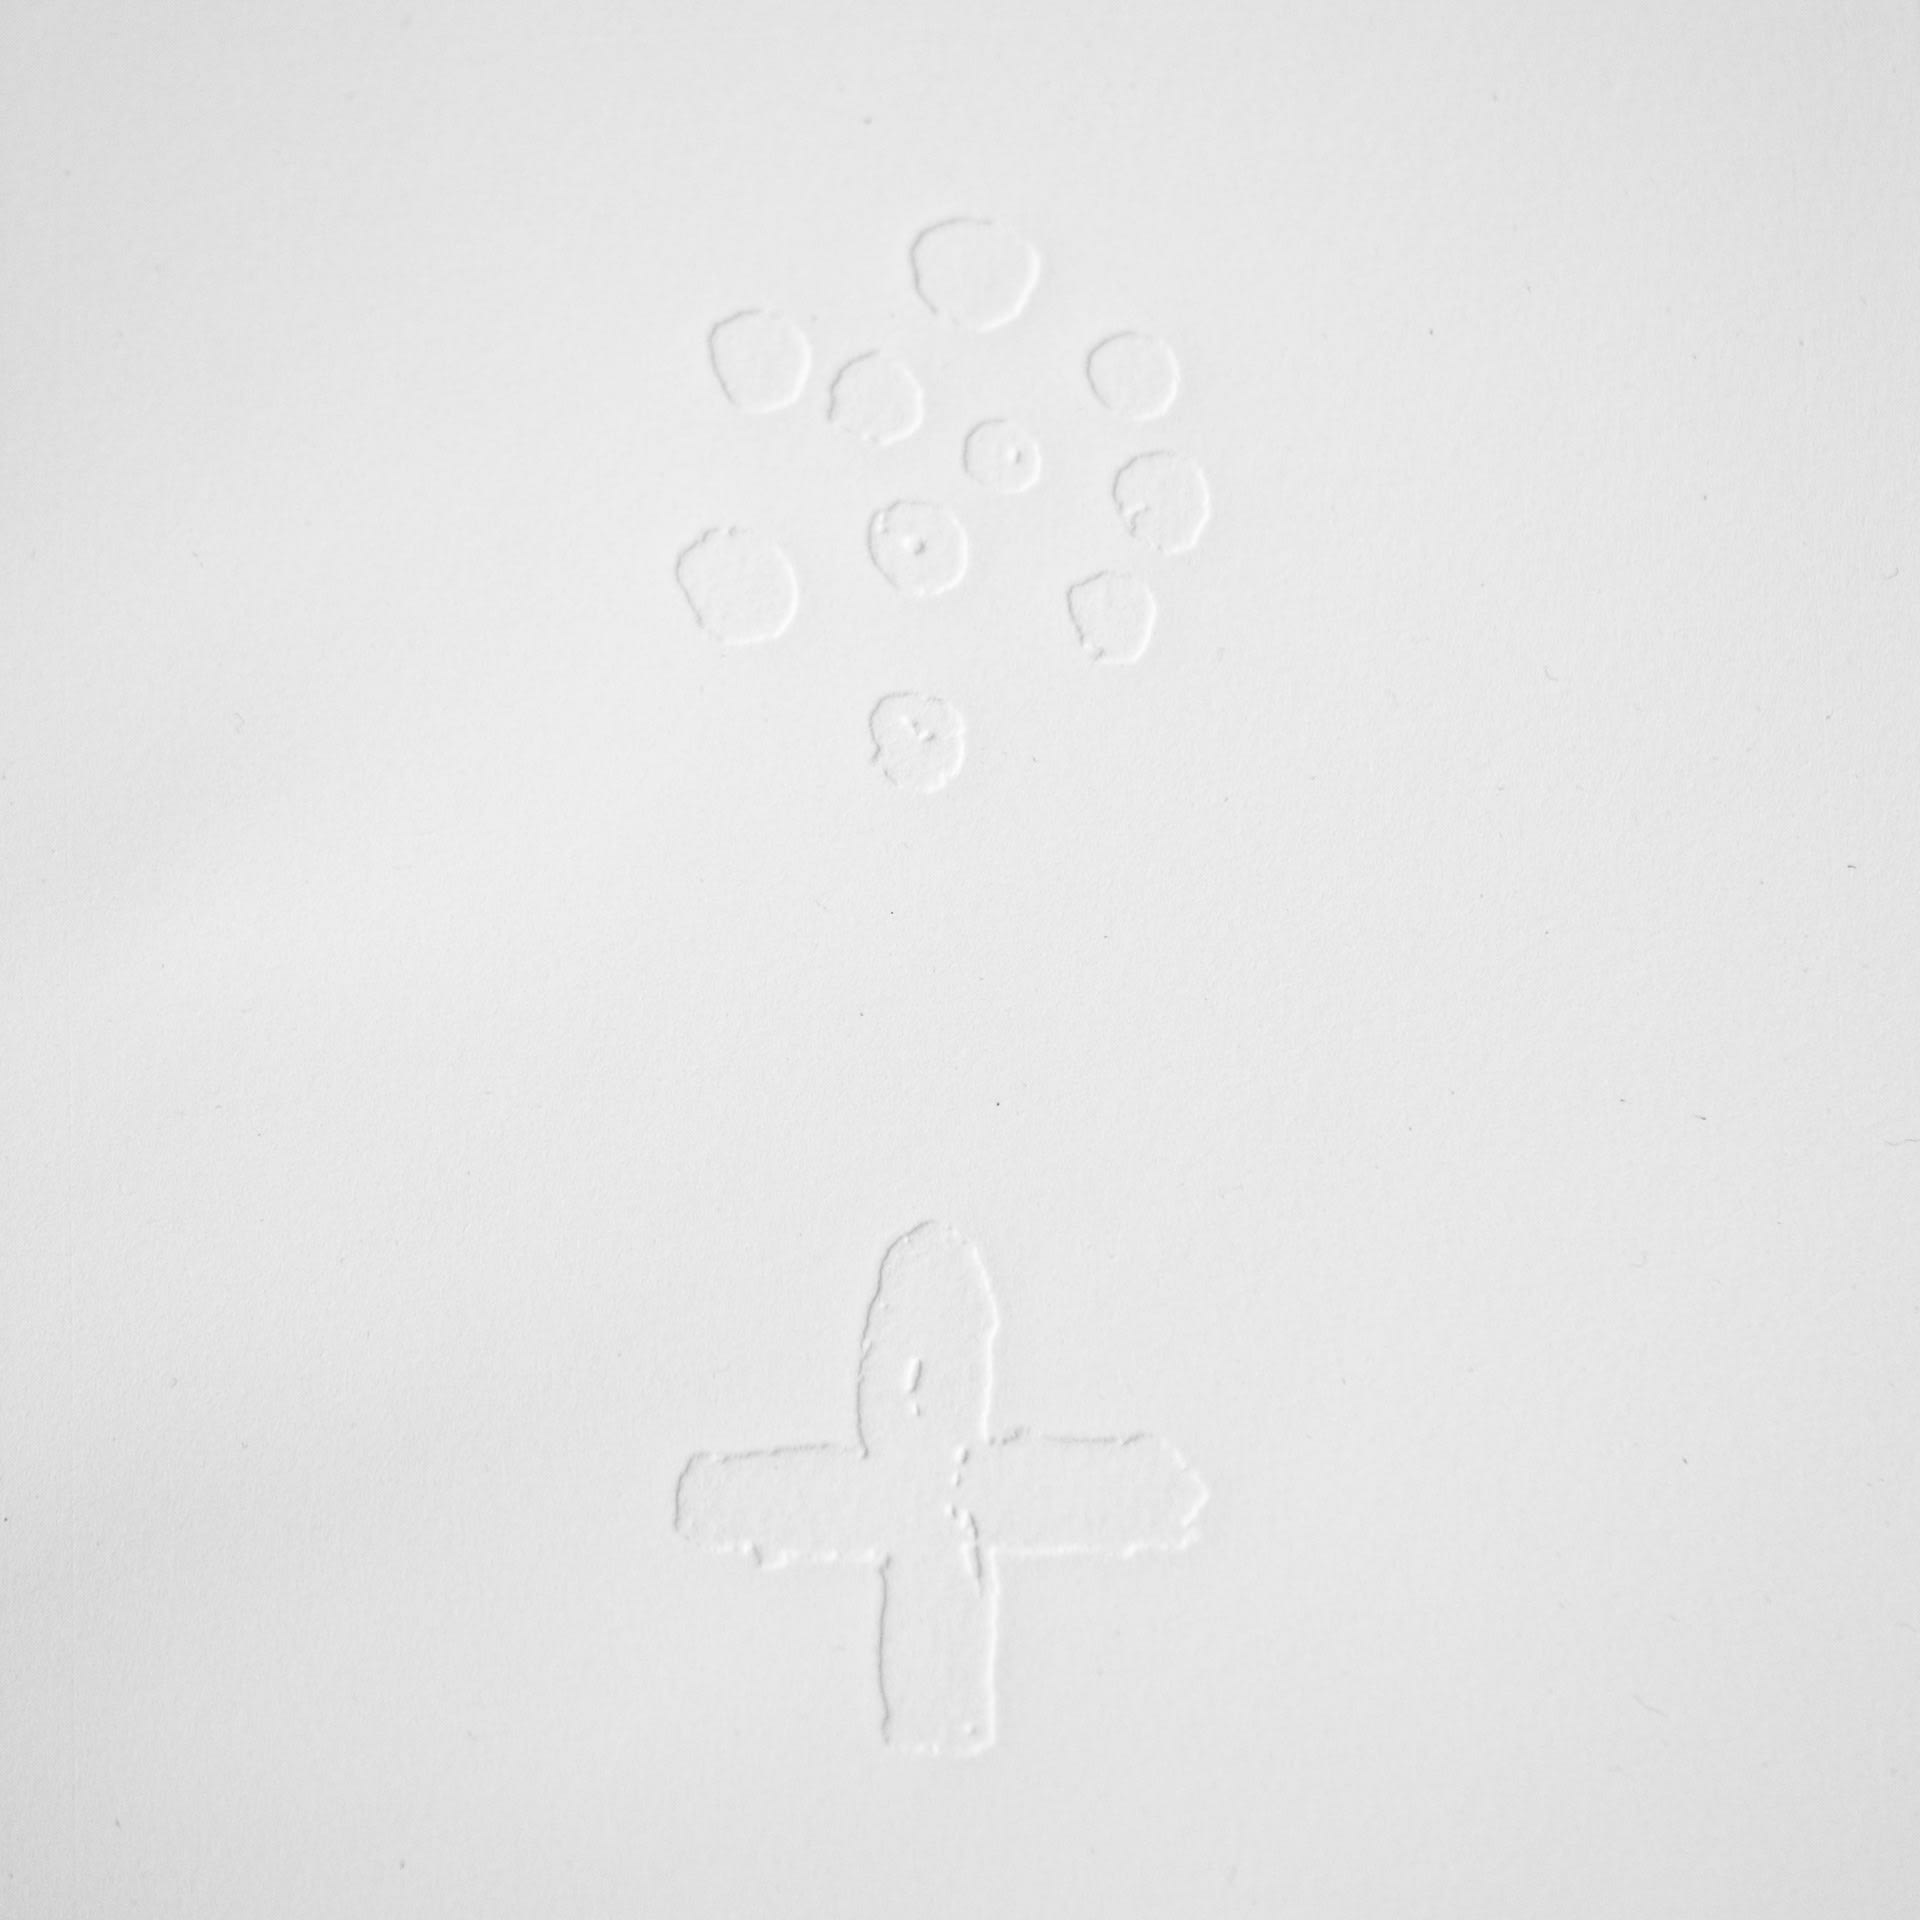 'The Star Of Woman'-image from the series 'Sirius'.Embossed white print of 'The Star Of Woman', constellation of the Dog